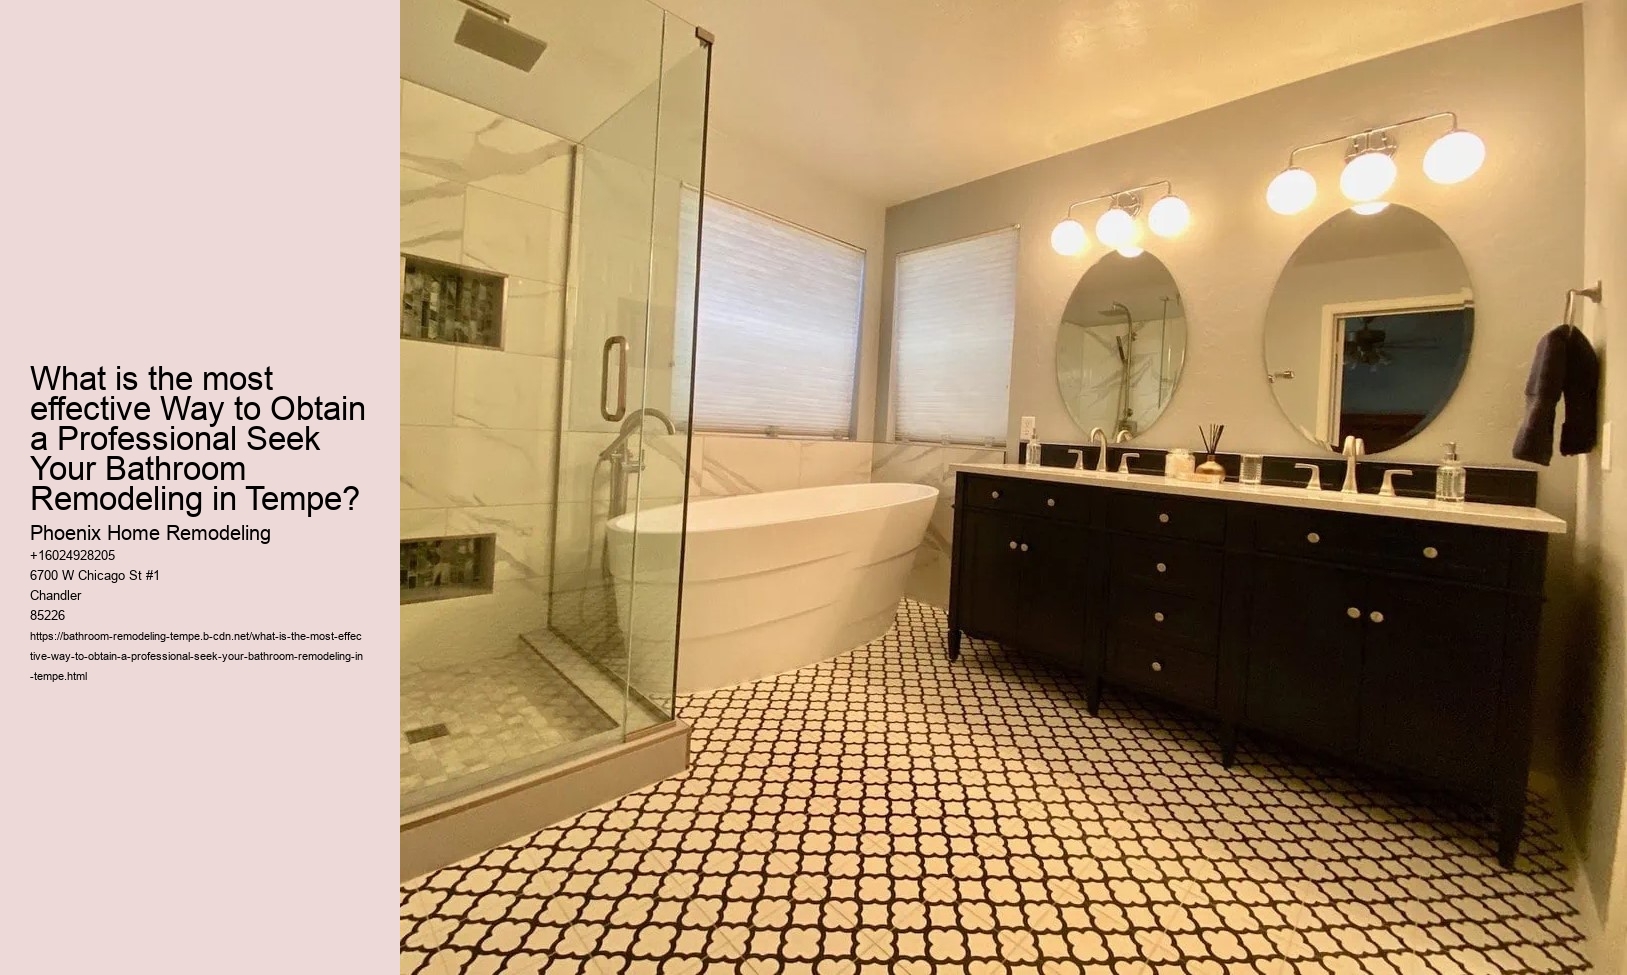 What is the most effective Way to Obtain a Professional Seek Your Bathroom Remodeling in Tempe?